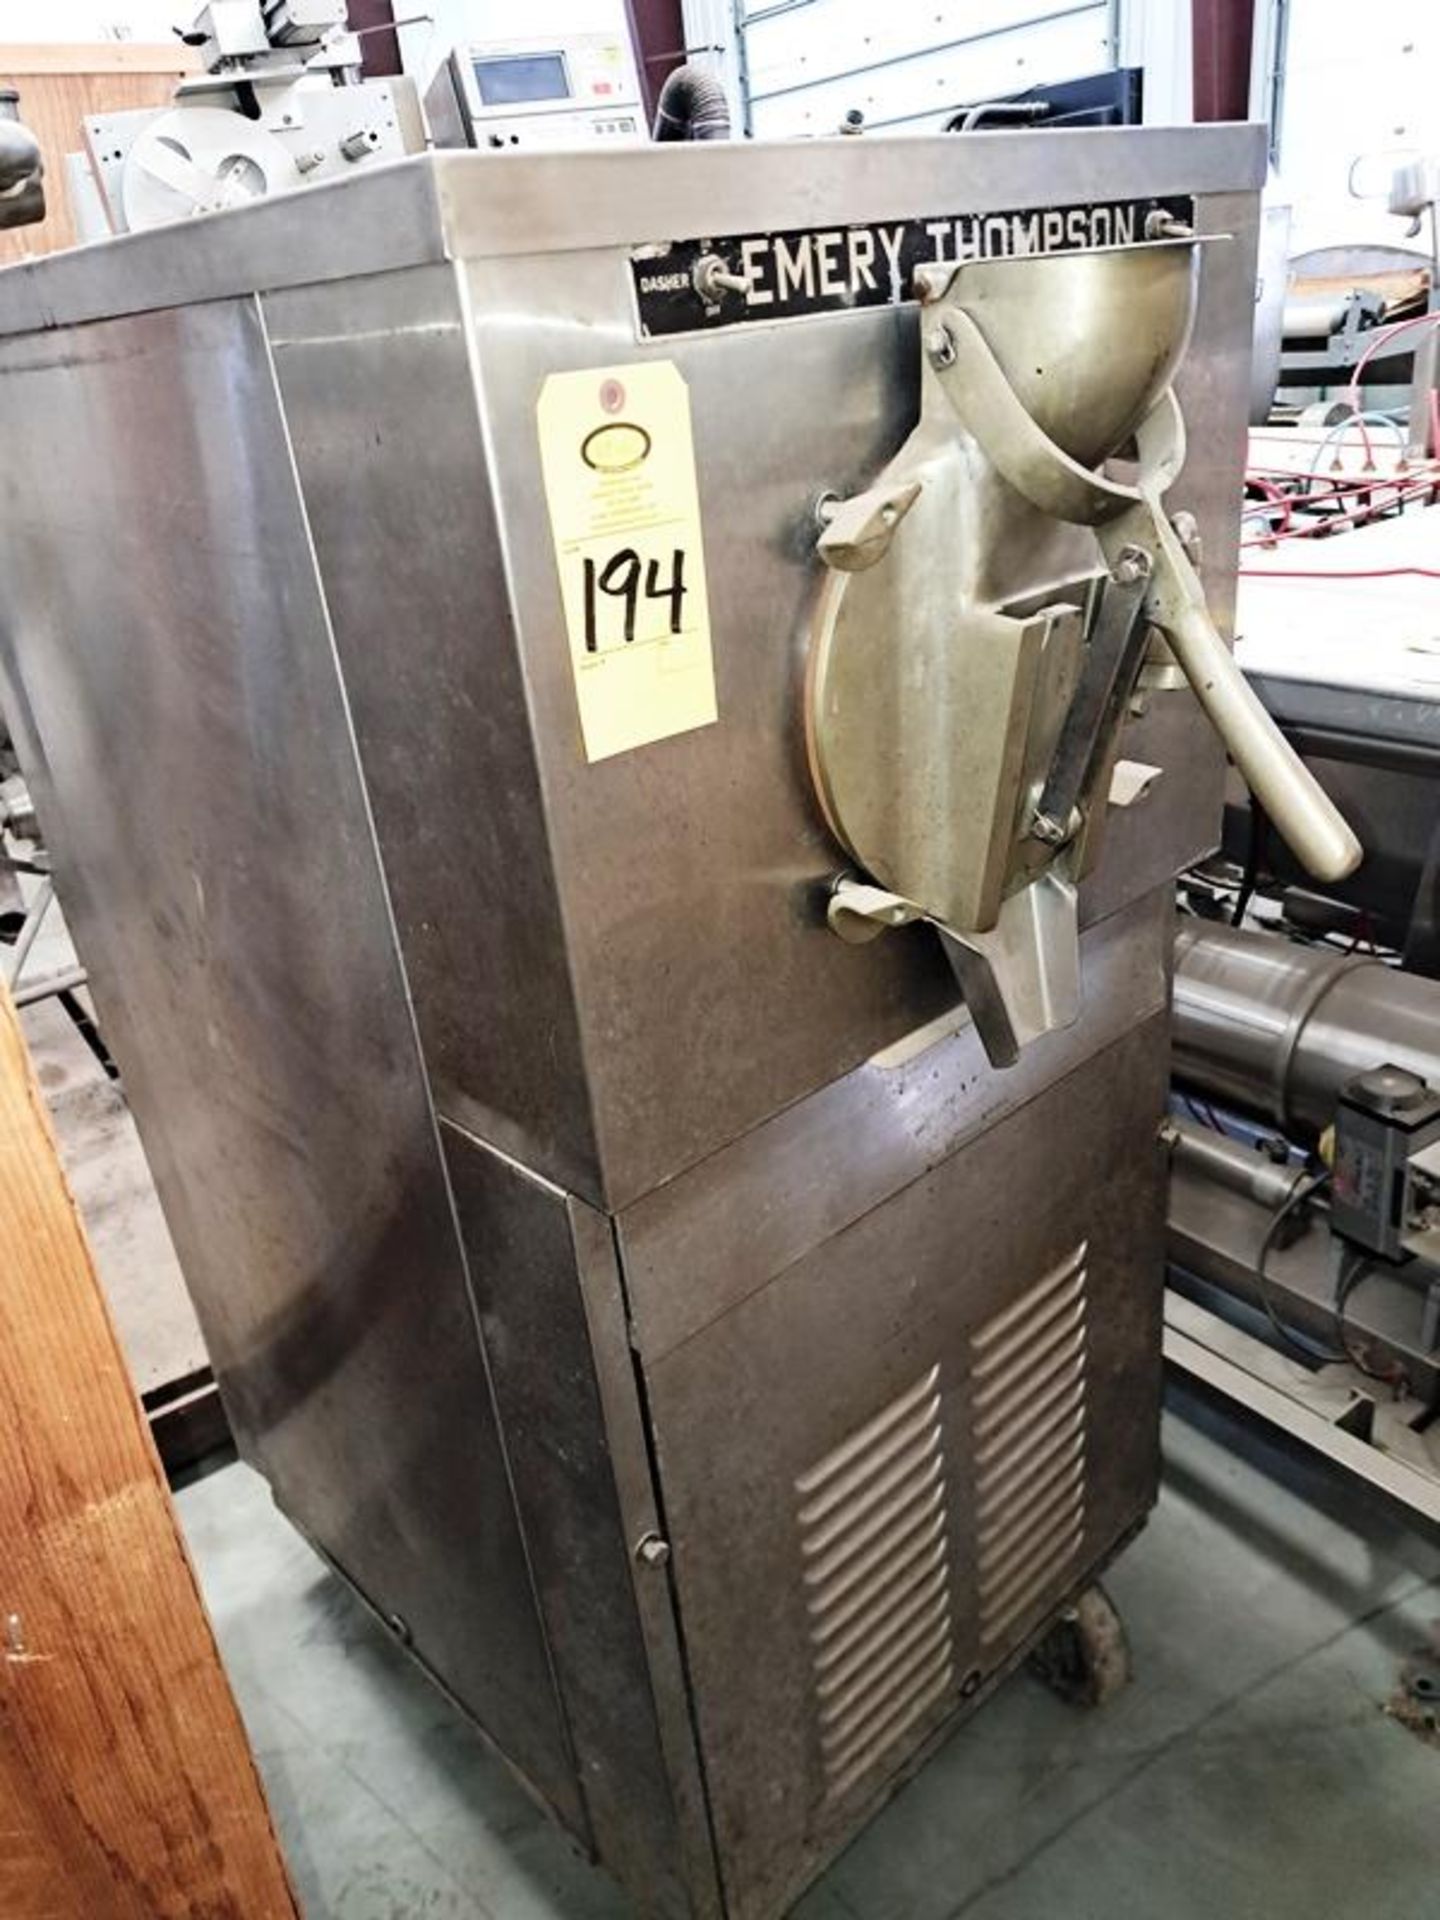 Emery Thompson Batch Freezer (Required Loading Fee: $25.00) NO HAND CARRY (Price Is For Simple